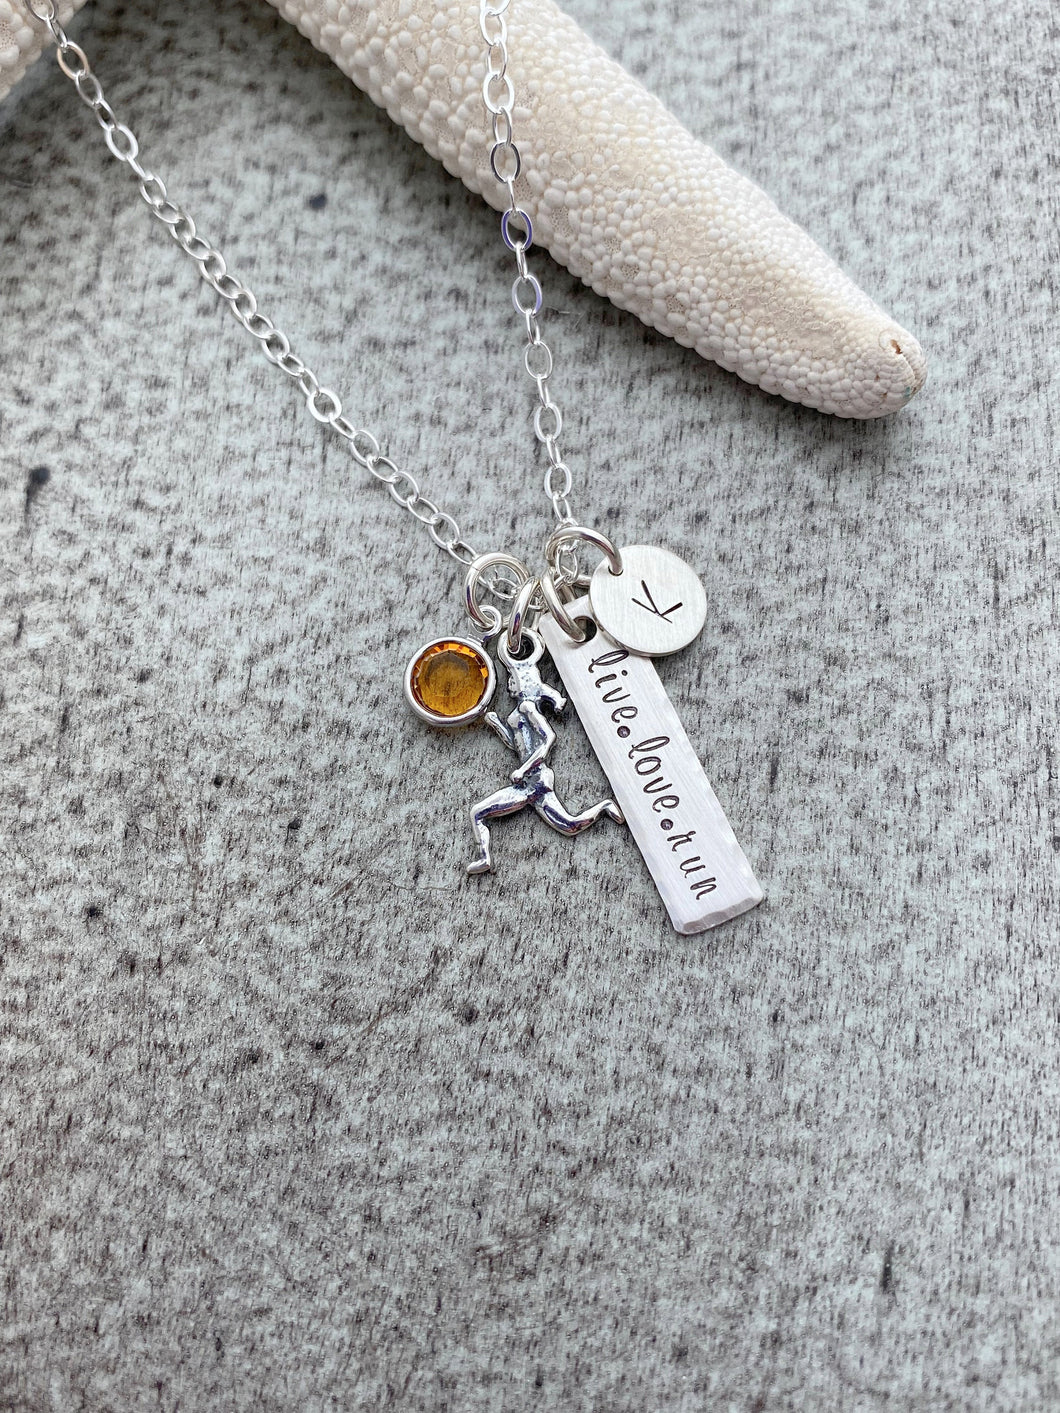 live love run necklace Sterling silver with birthstone and personalized initial disc - gift for runner - birthday gift for her